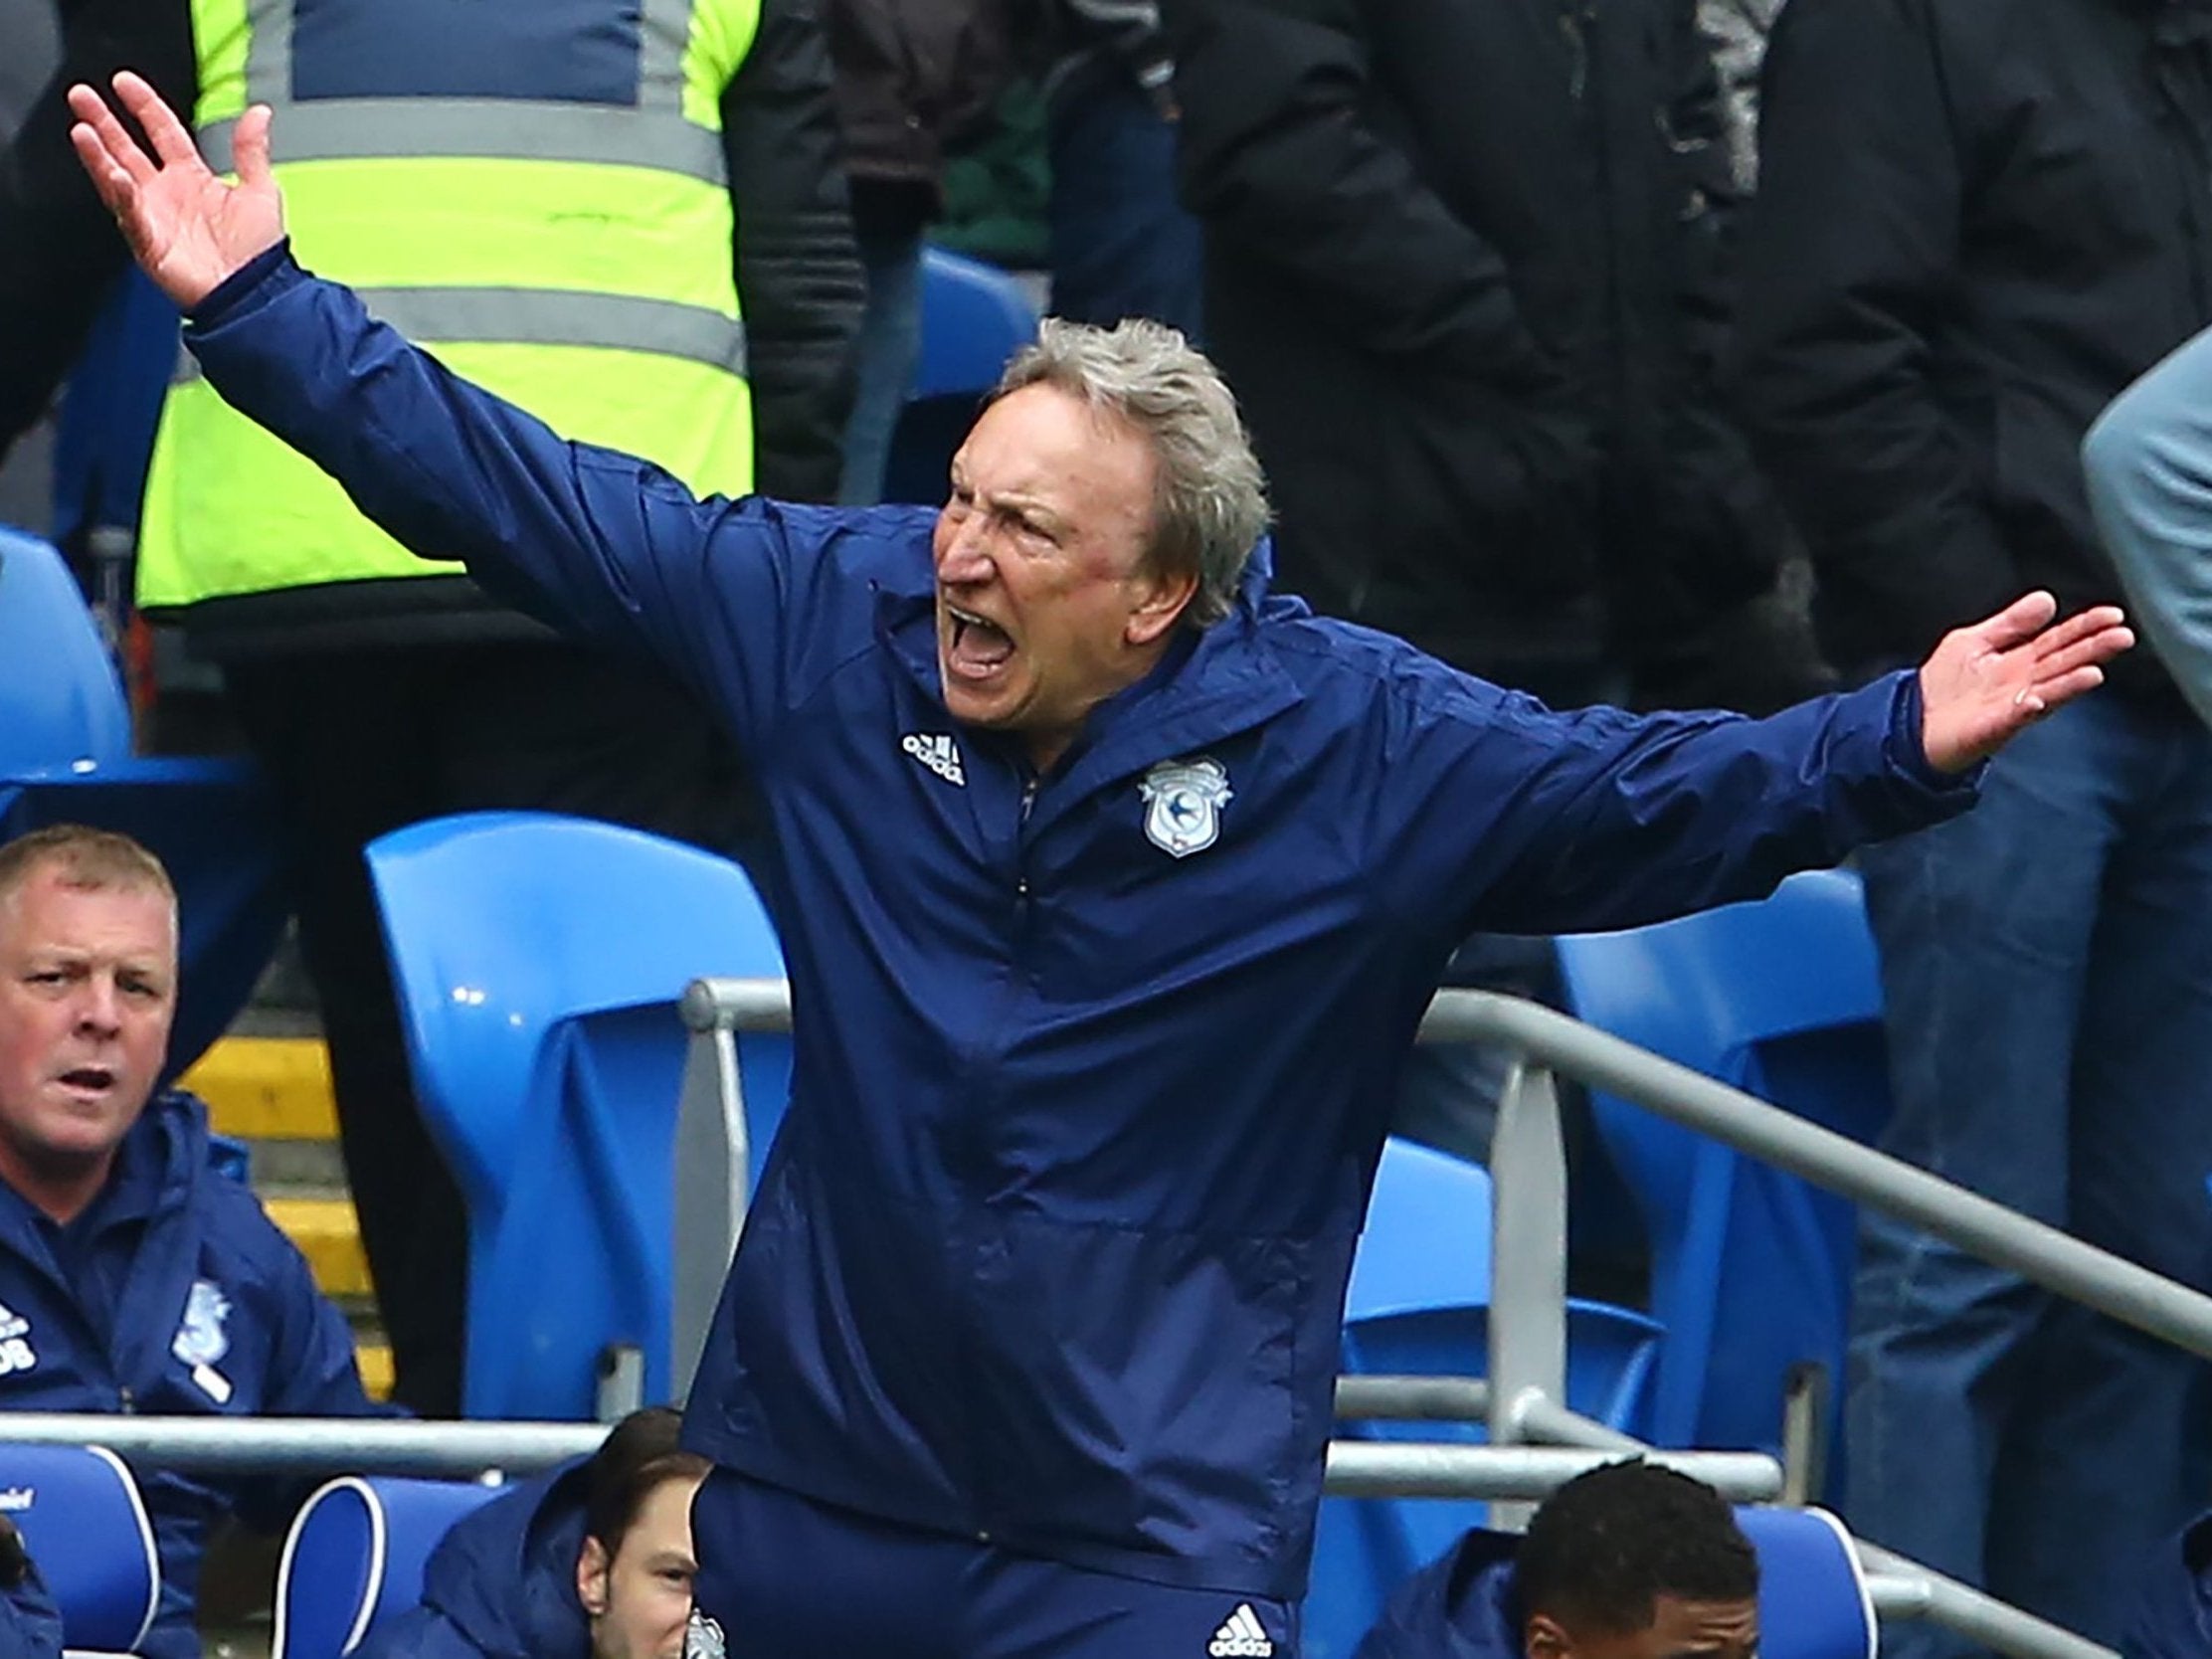 Neil Warnock expects Cardiff City players to honour to Emiliano